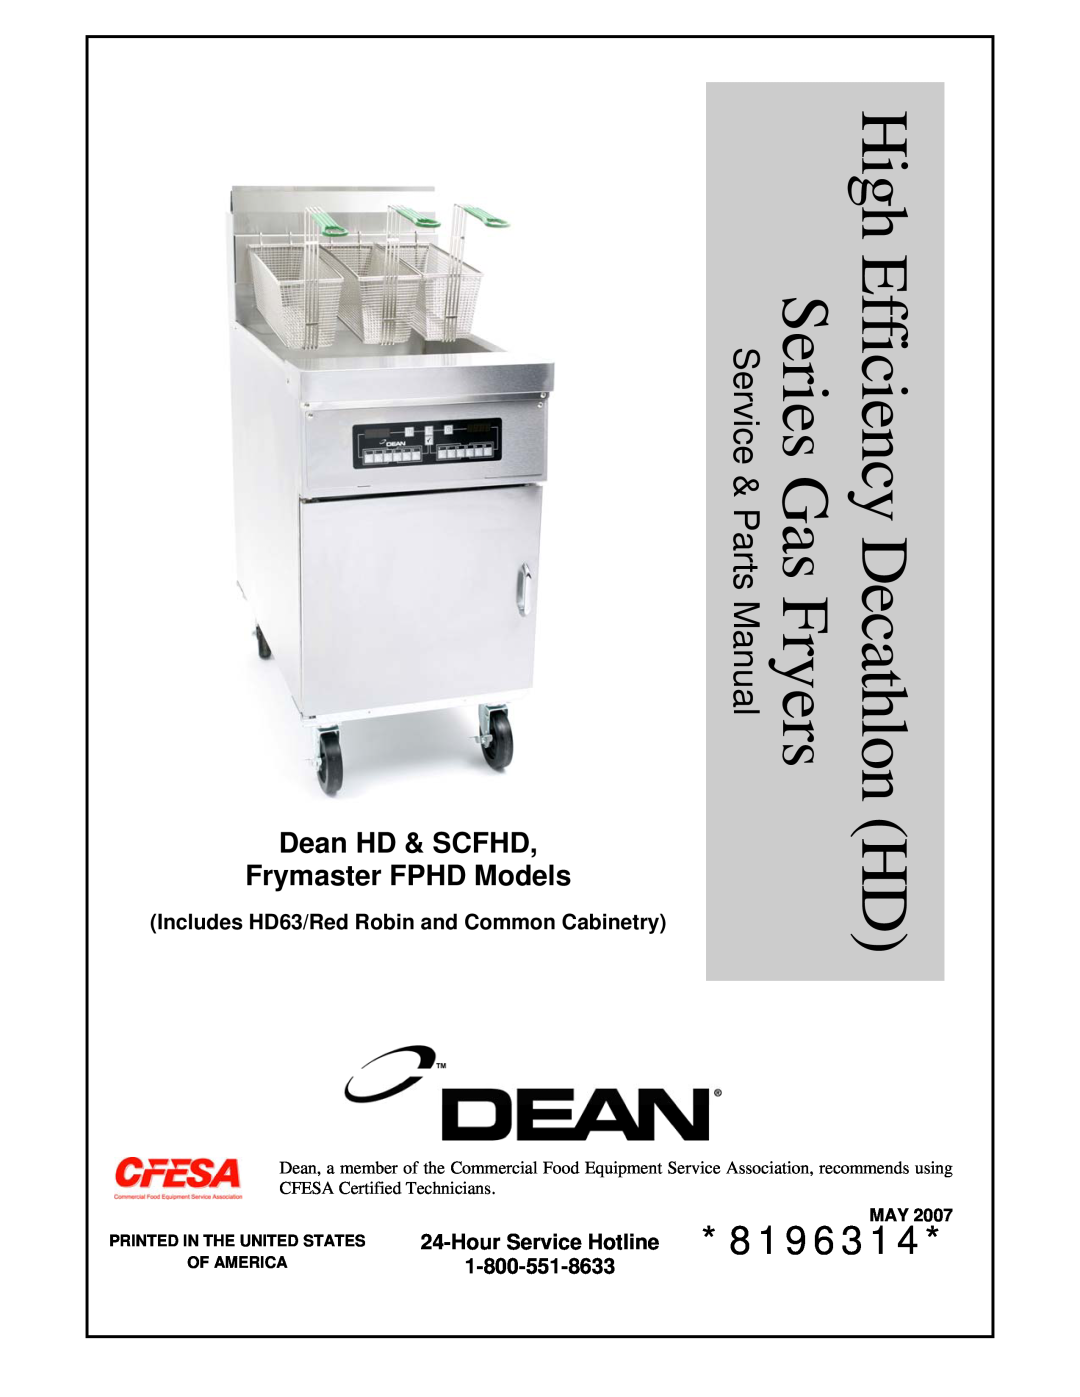 Frymaster manual Dean HD & SCFHD Frymaster FPHD Models, Includes HD63/Red Robin and Common Cabinetry, 1-800-551-8633 